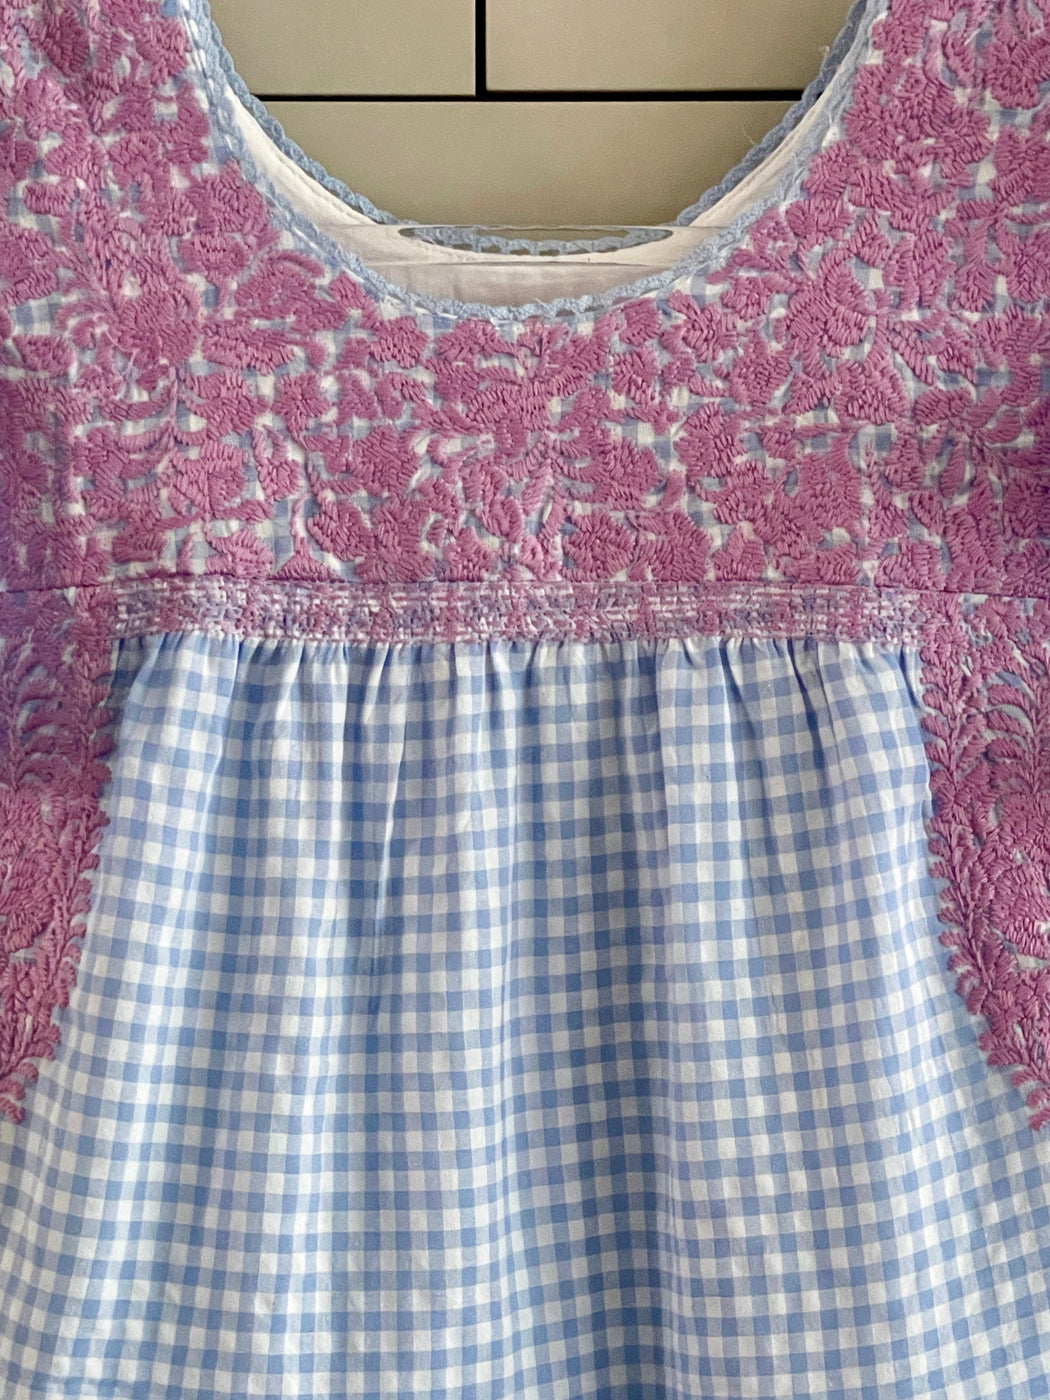 Hand-Embroidered Mexican Midi Dress - Blue Gingham